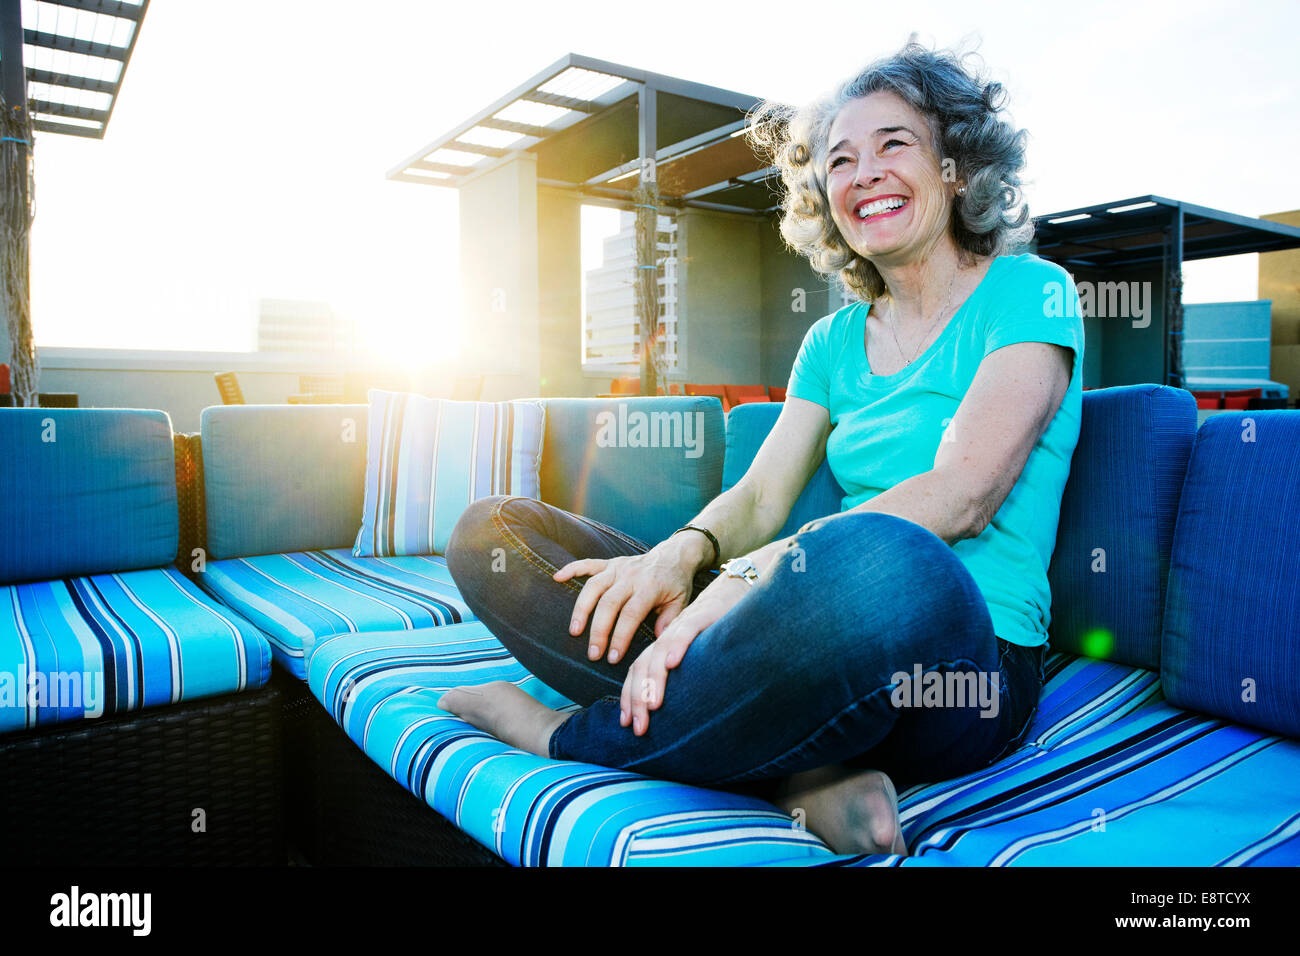 Caucasian woman relaxing on urban rooftop Stock Photo